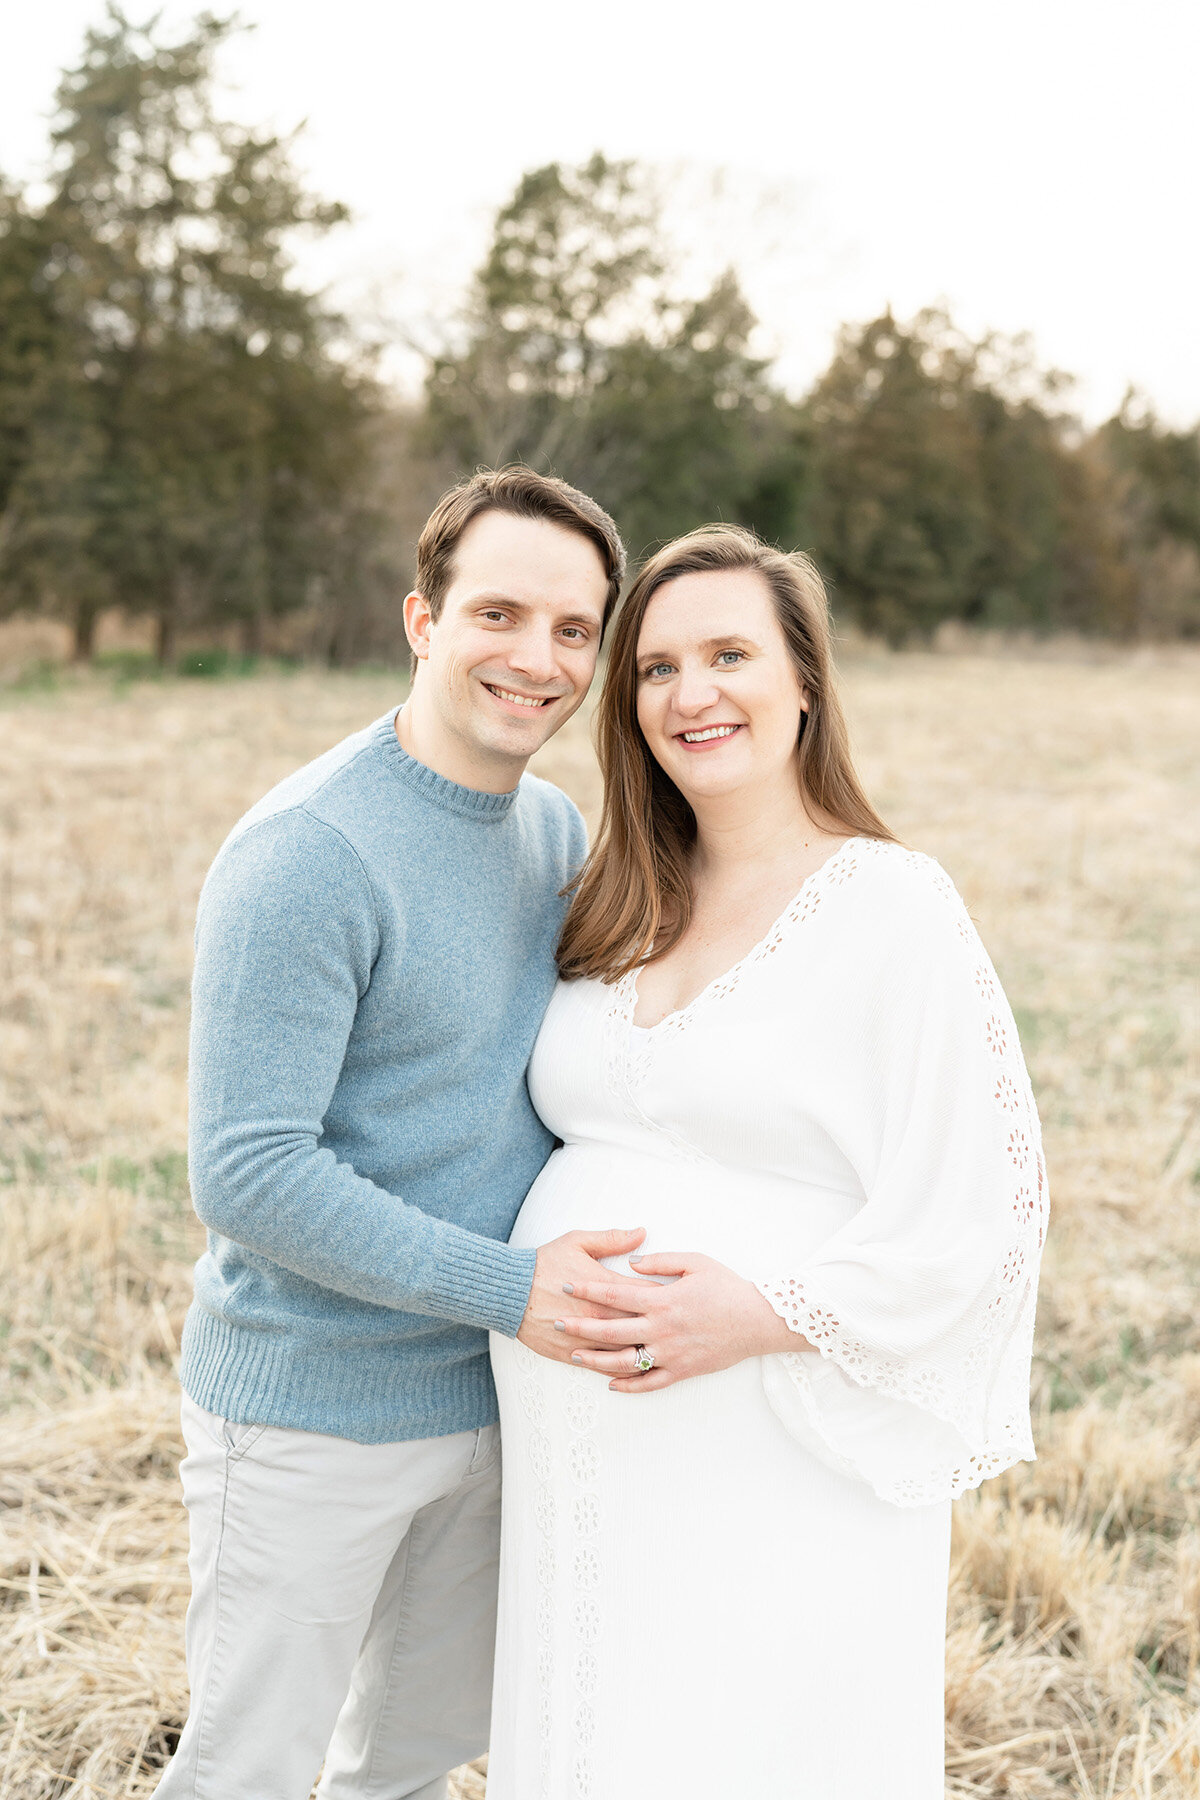 Julie Brock Photography naturally poses this smiling couple during an outdoor maternity photo session. Mother is wearing a Fillyboo dress borrowed from Julie Brock’s wardrobe for mothers.